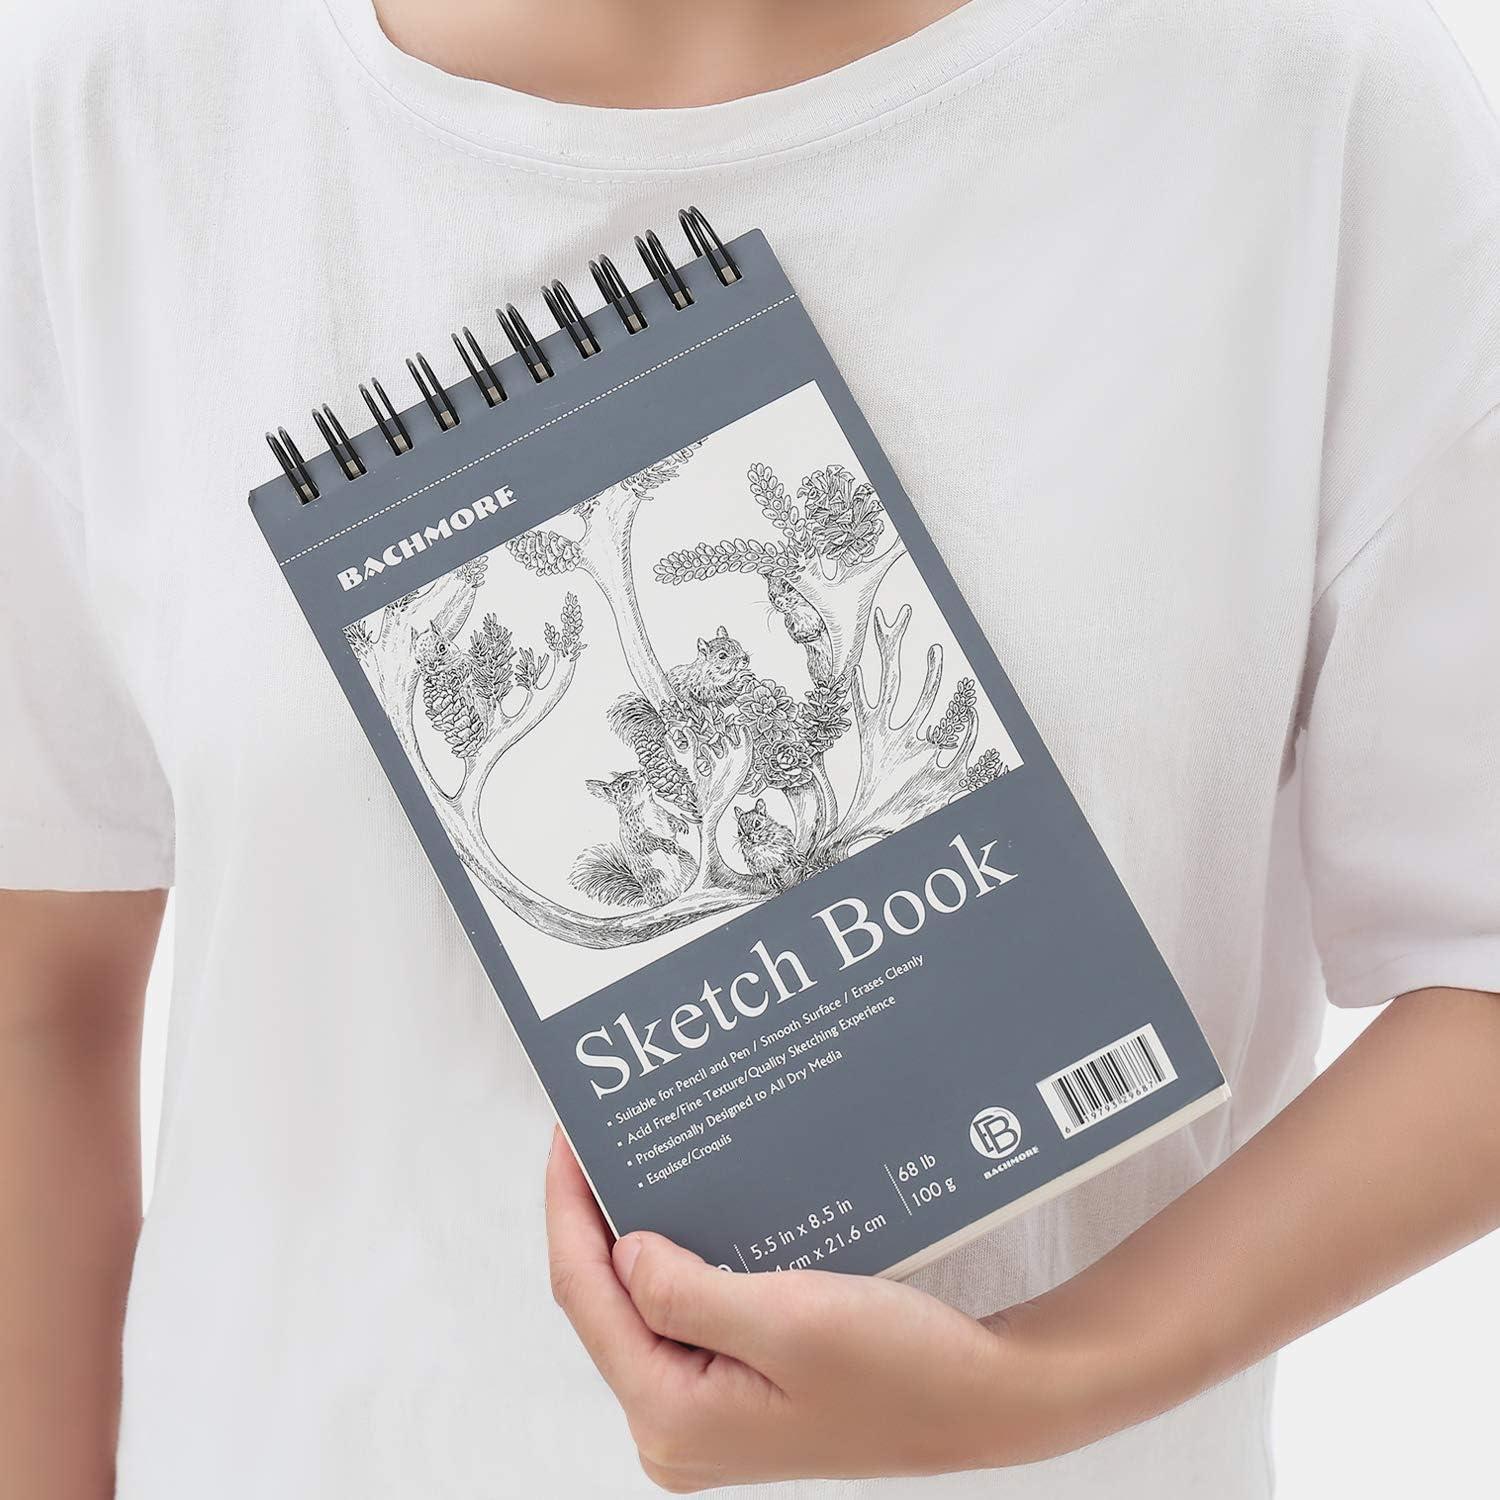 Bachmore Sketchpad 5.5X8.5 Inch (68lb/100g), 100 Sheets of Spiral Bound  Sketch Book for Artist Pro & Amateurs